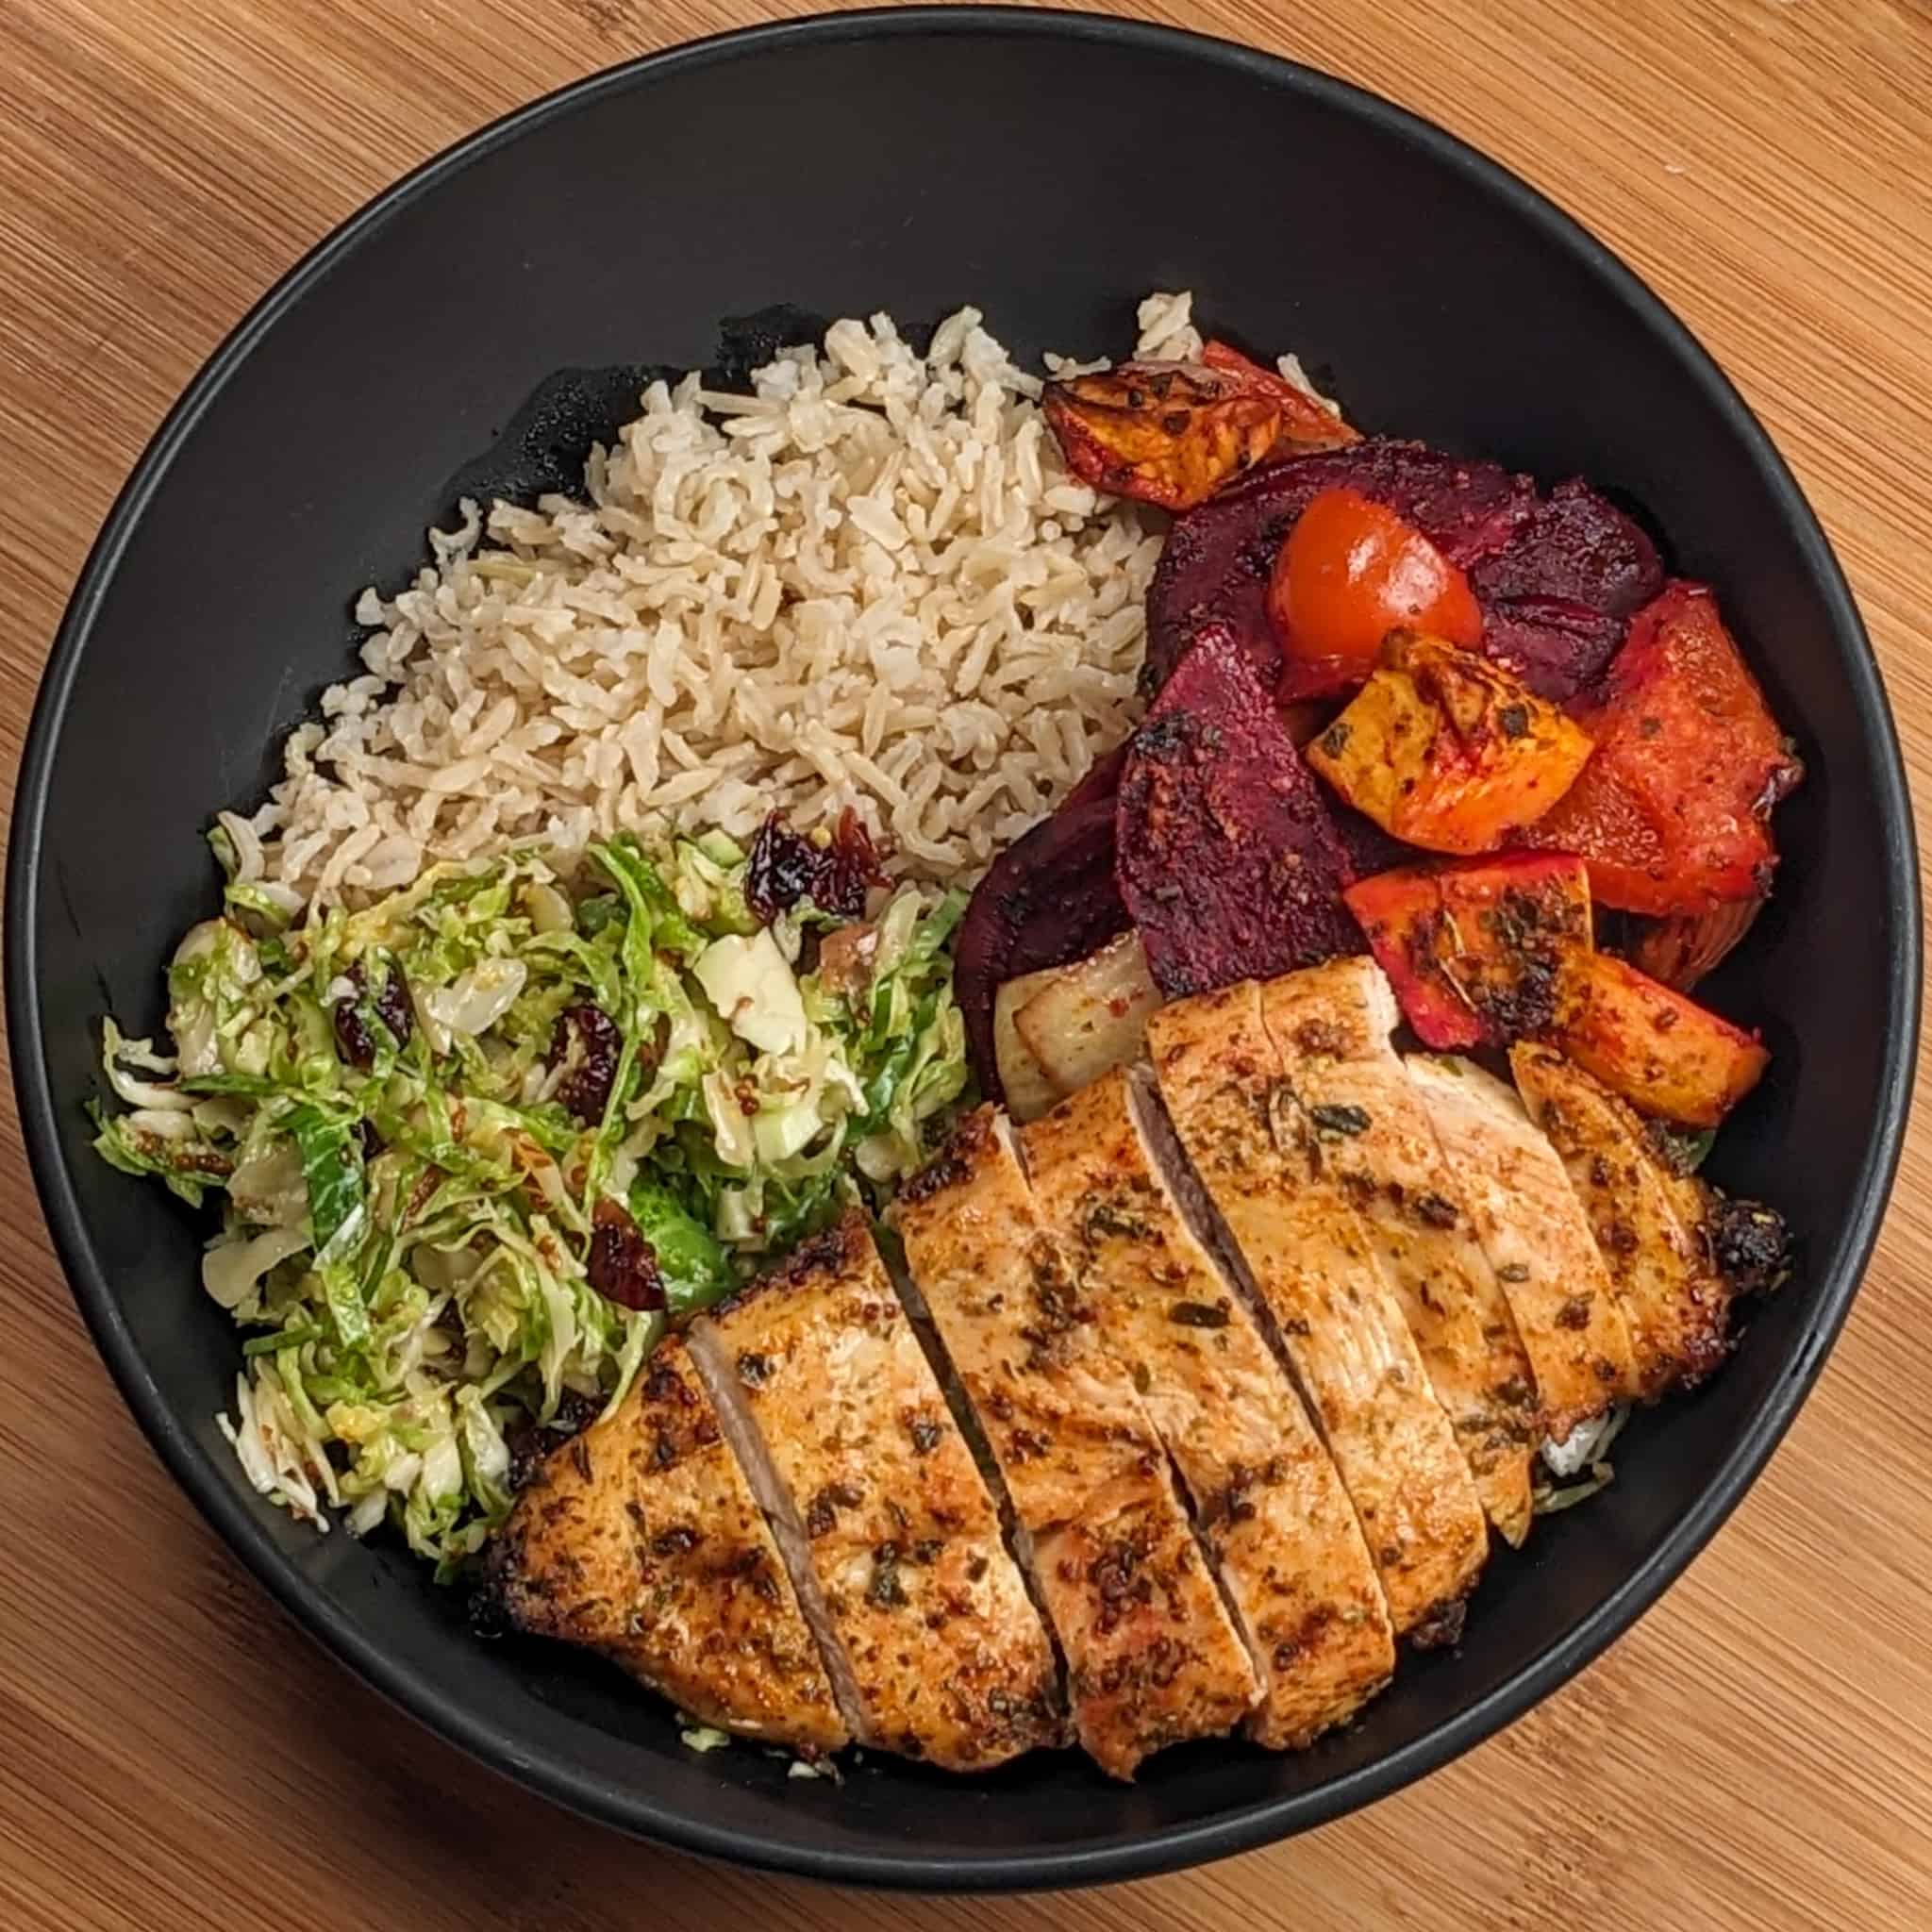 a wide rim bowl with brown basmati rice, root vegetables, sliced chicken breast and shaved brussels sprout salad